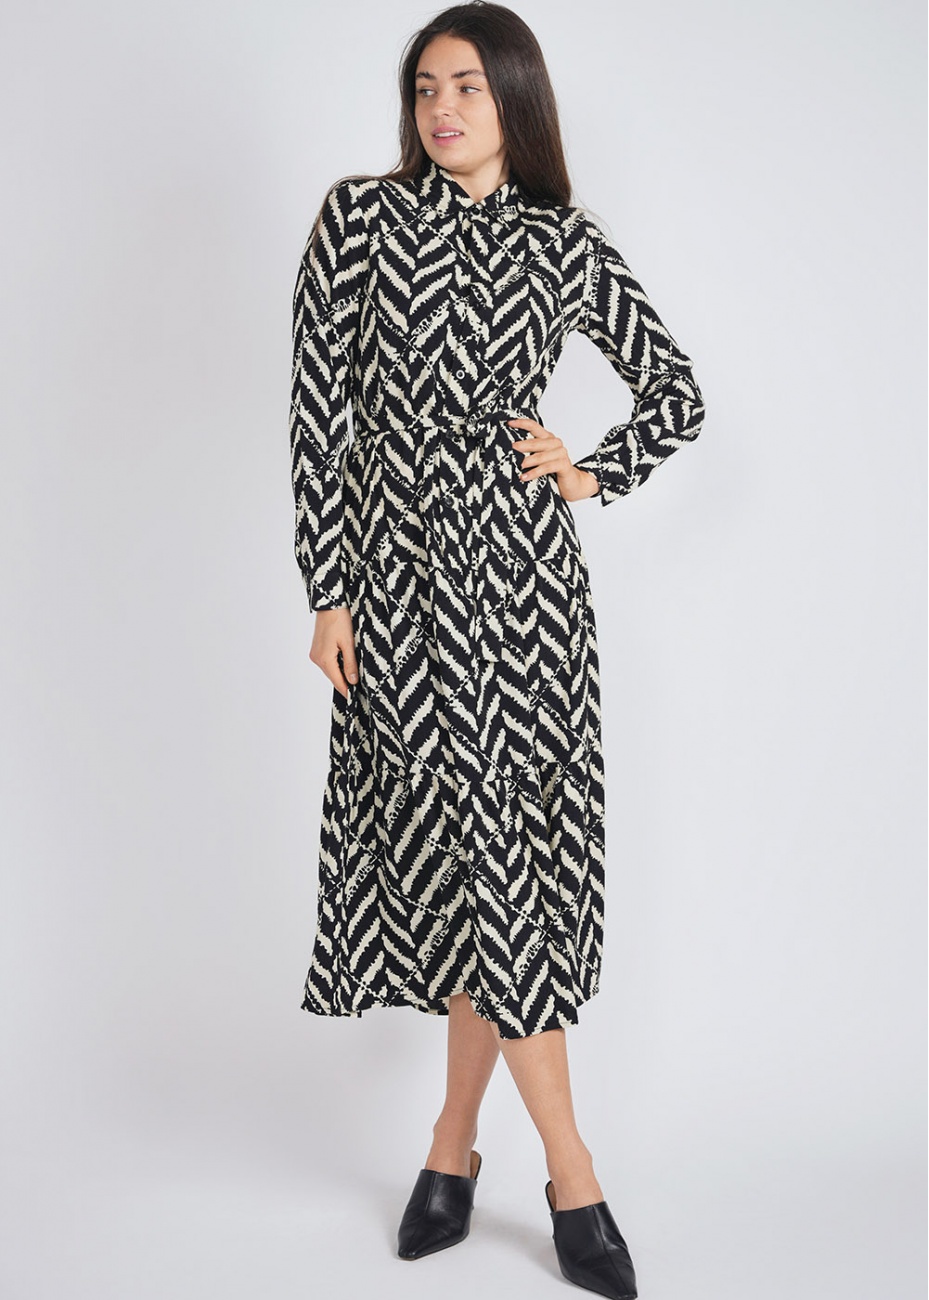 Long-Sleeved Black & White Dress with Classic Shirt Neckline